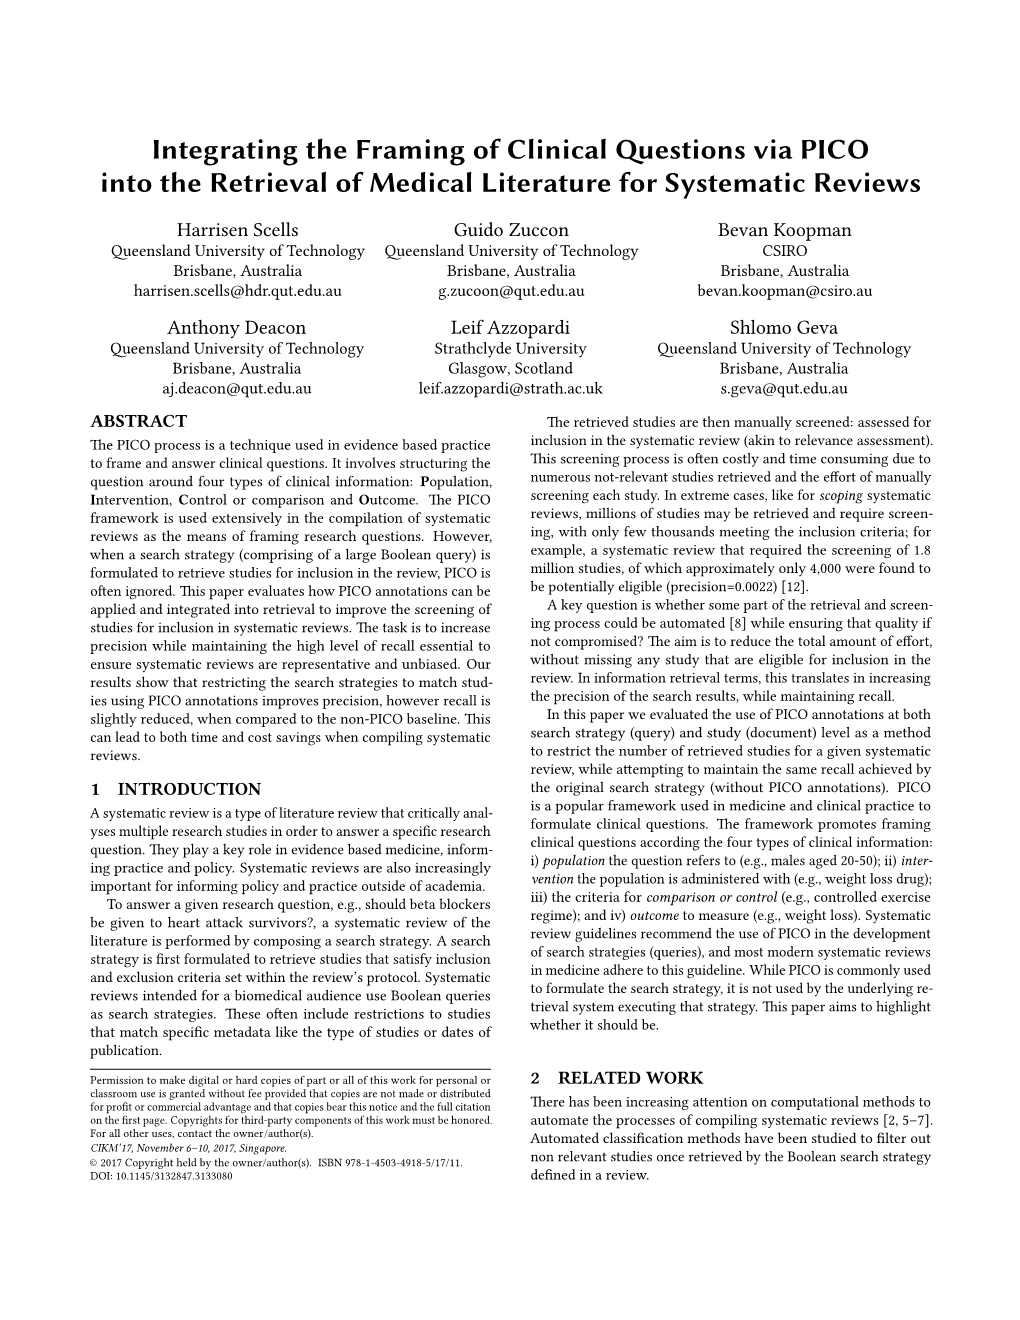 Integrating the Framing of Clinical ƒEstions Via PICO Into the Retrieval of Medical Literature for Systematic Reviews